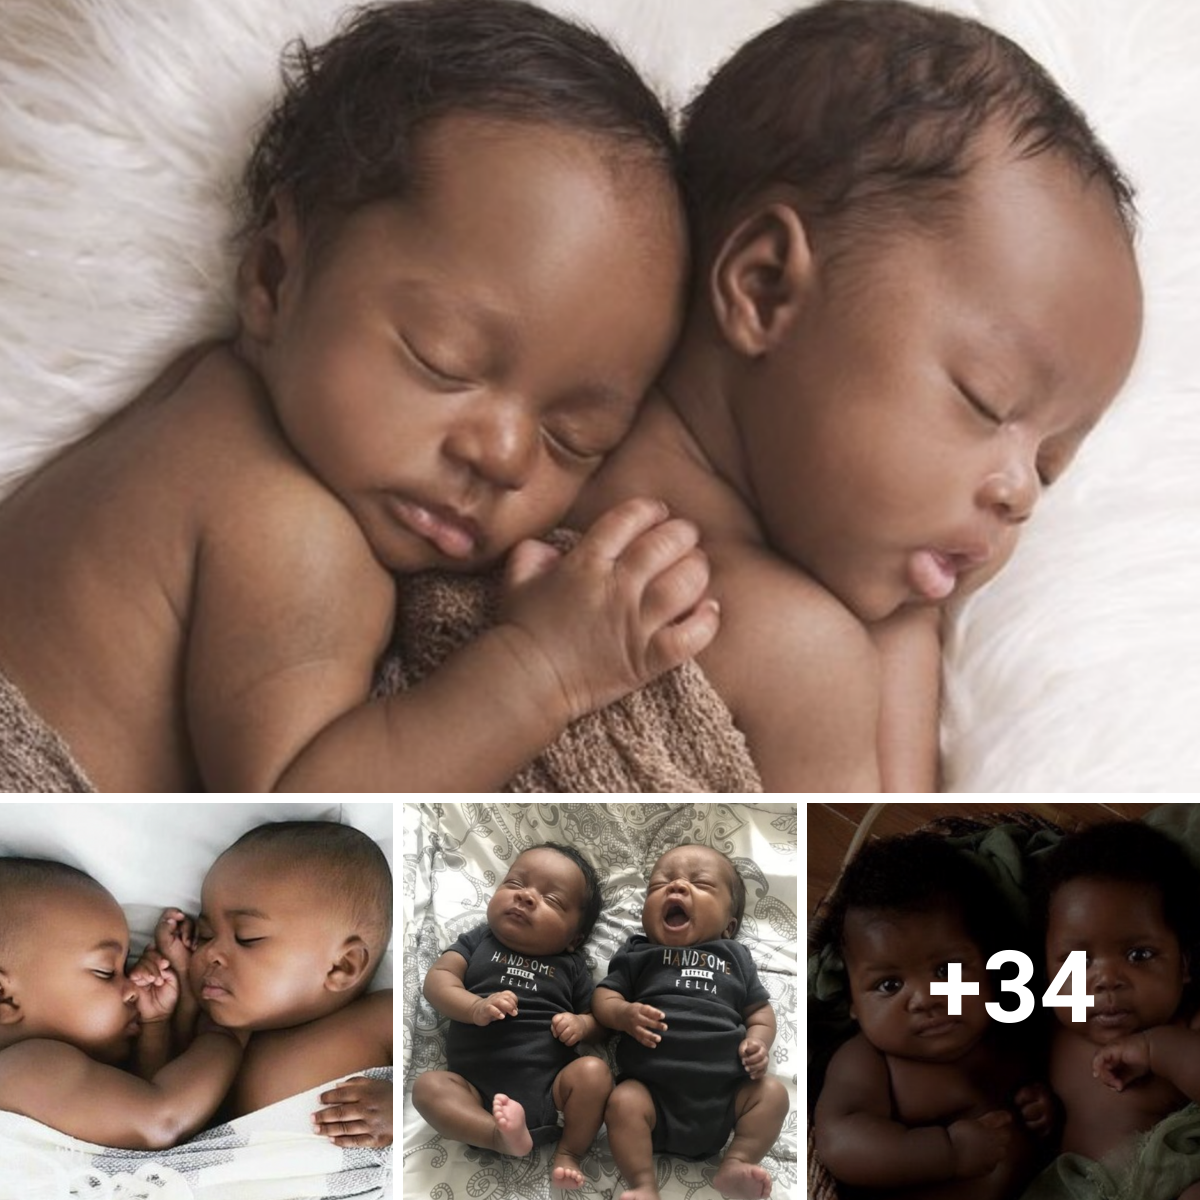 The distinct features and lovely unique beauty of identical black twins